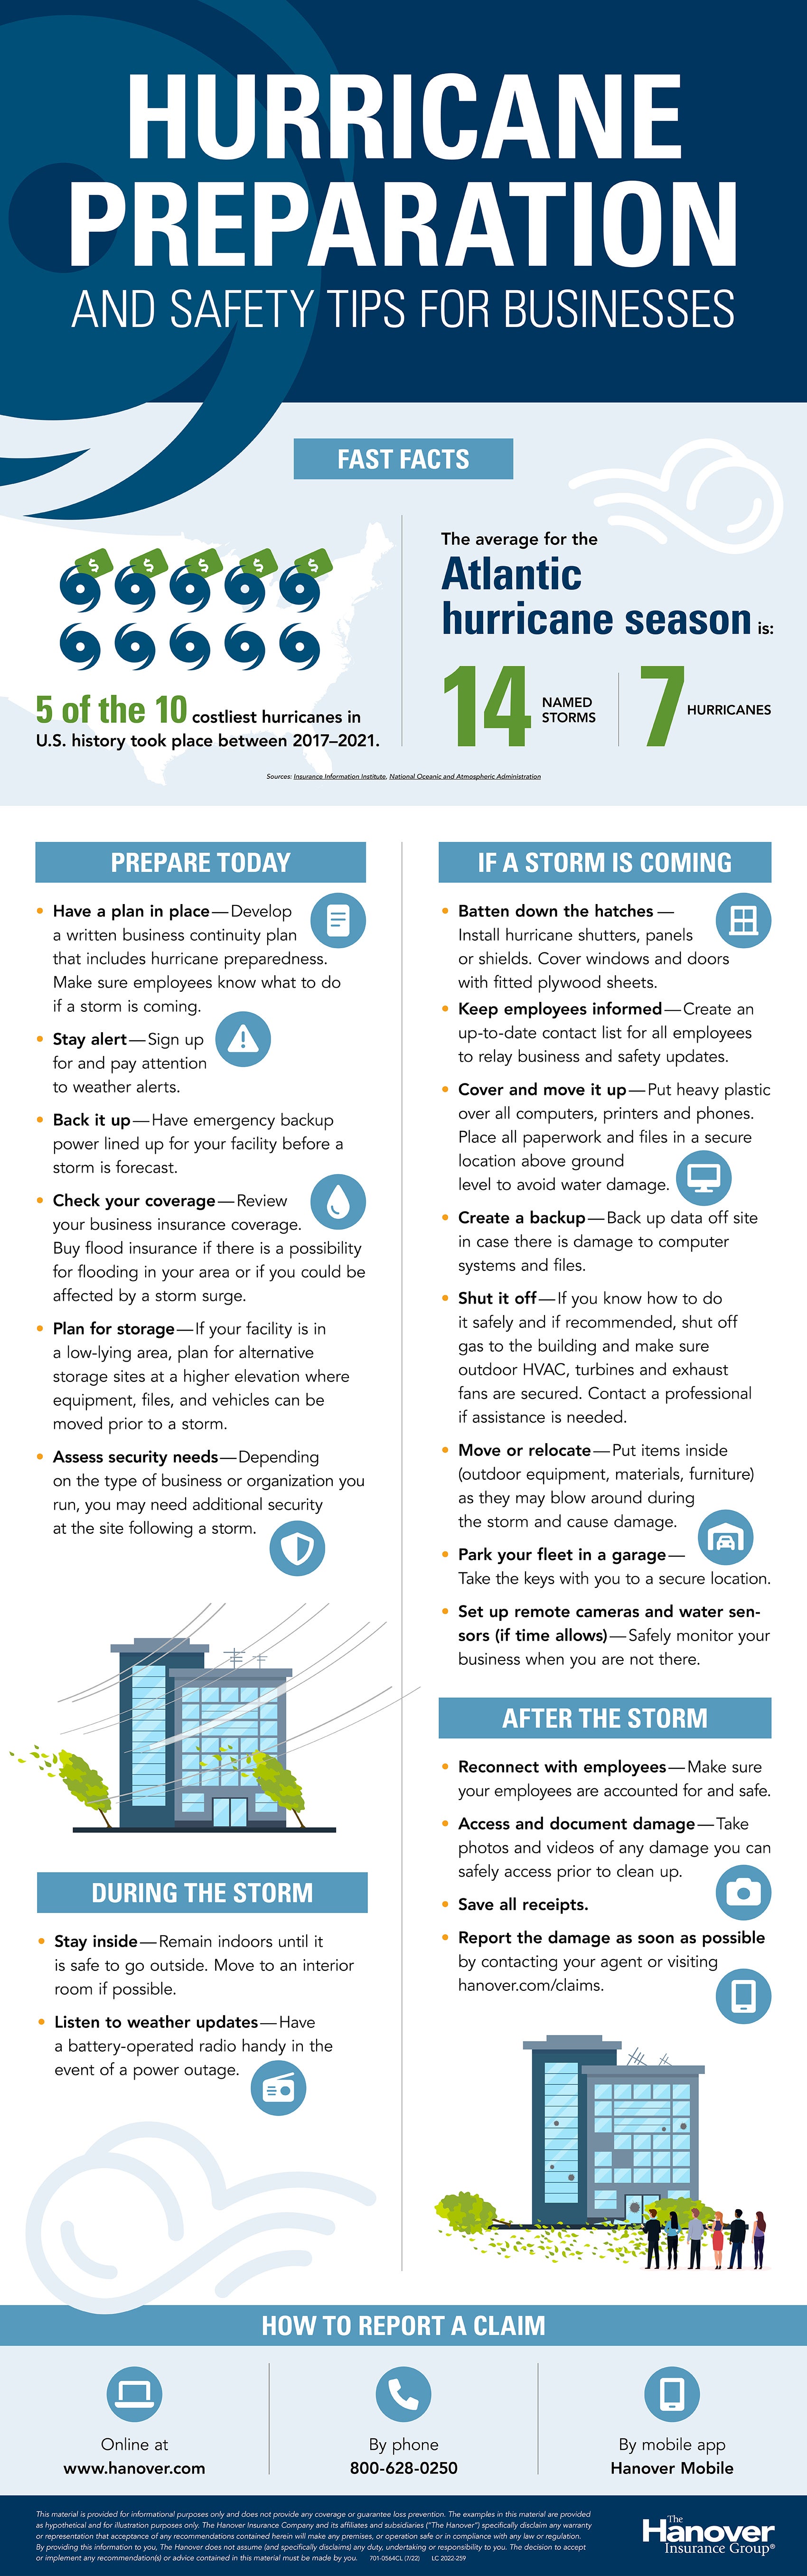 Infographic with business tips for what to do before, during and after a hurricane.